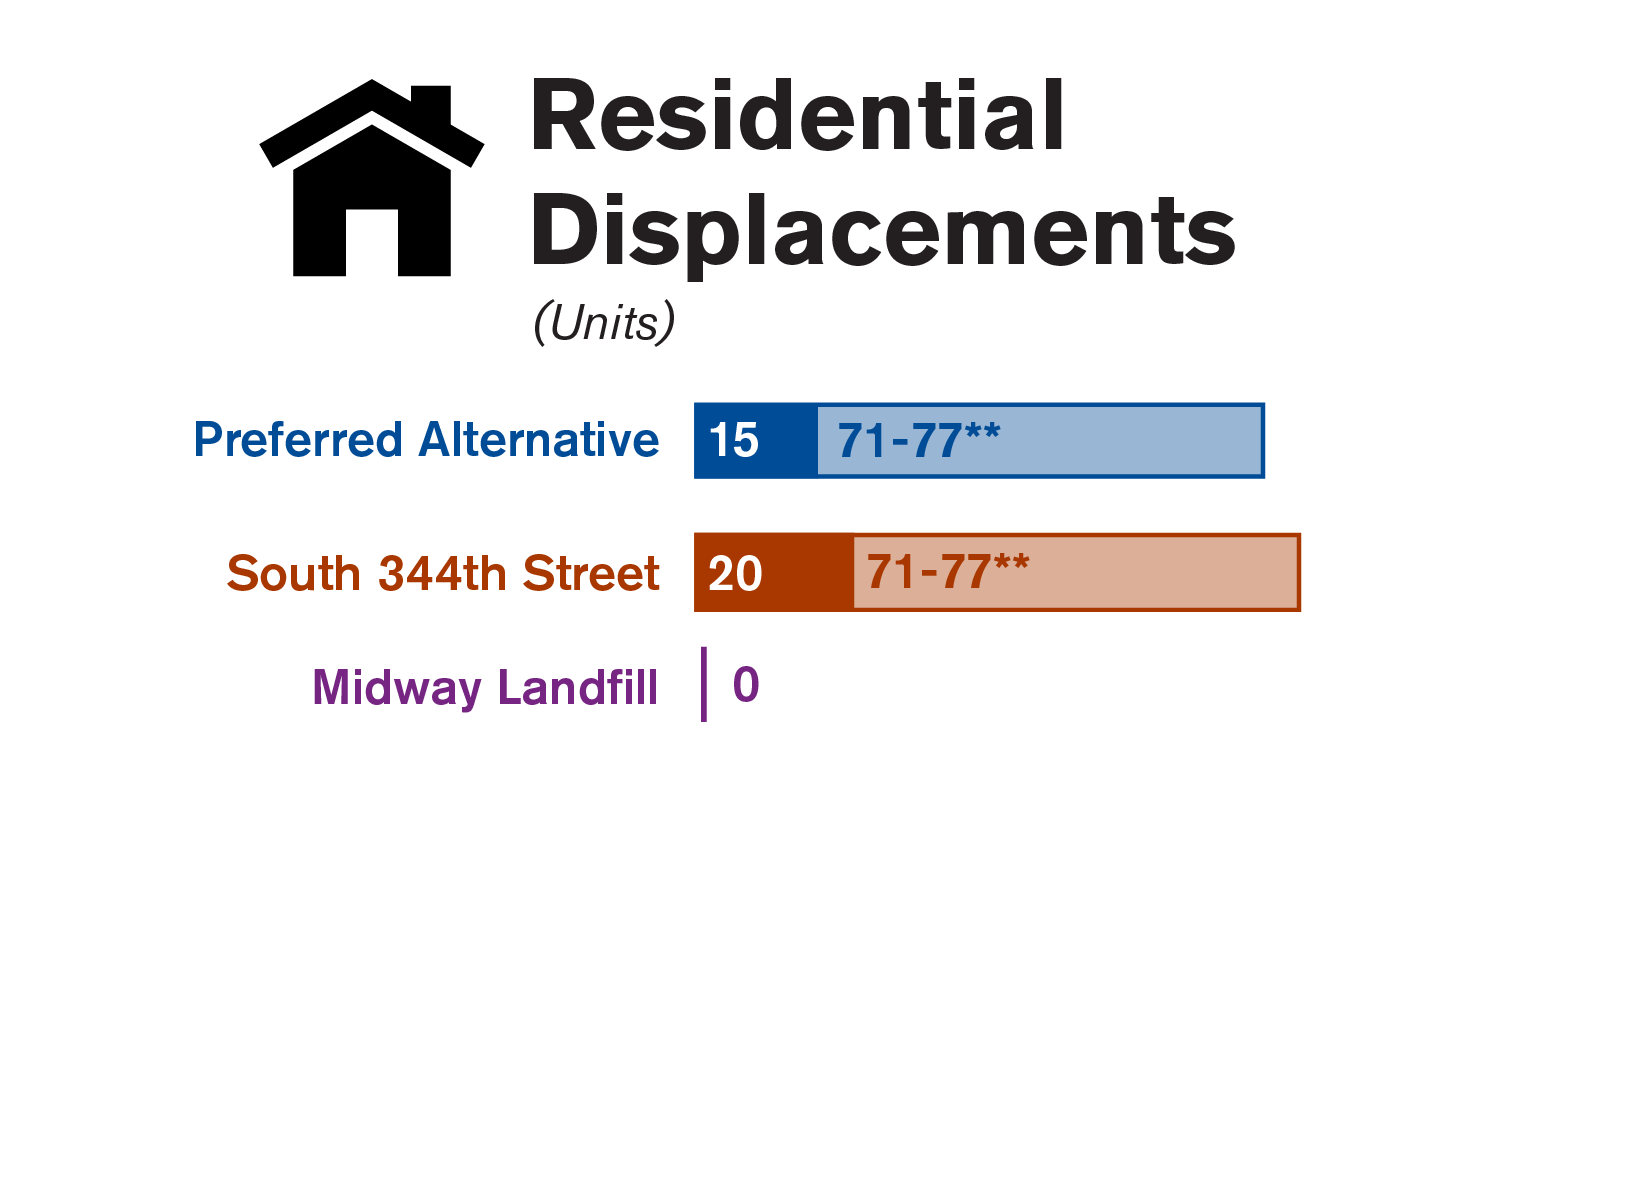 The preferred Alternative has 15 residential displacements from the site and 71 to 77 from the additional track impacts. The South 344th Street Alternative has 20 residential displacements from the site and 71 to 77 from the additional track impacts. The Midway Landfill Alternative has no residential displacements. The additional track impacts would occur as part of the Tacoma Dome Link Extension if the Midway Landfill Alternative was selected as the project to be built.